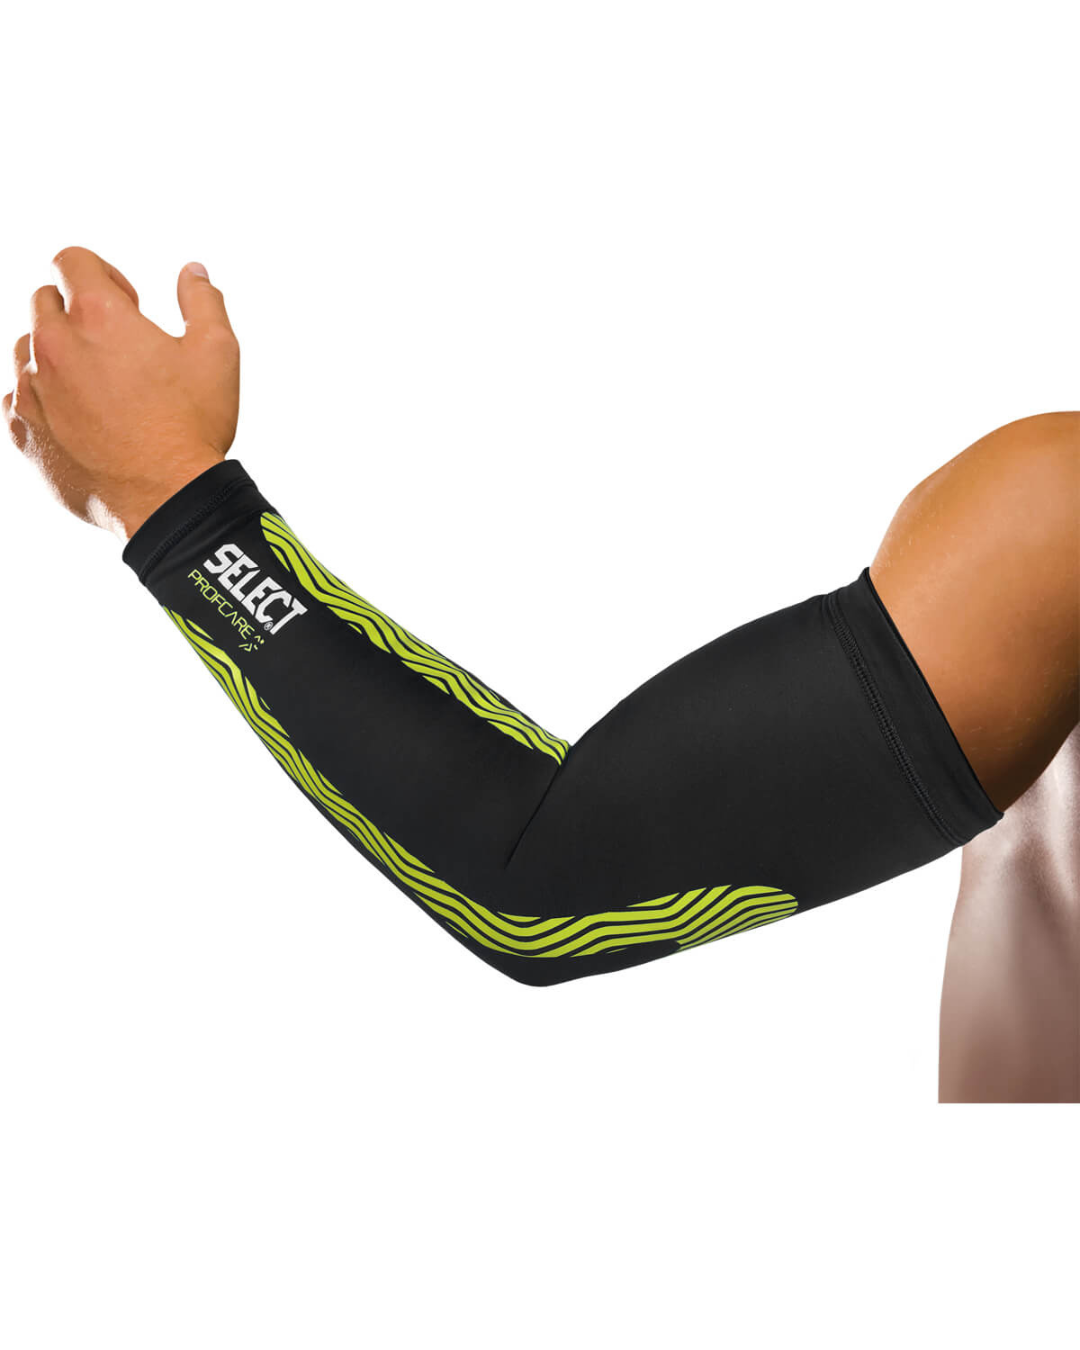 Select Compression Sleeve